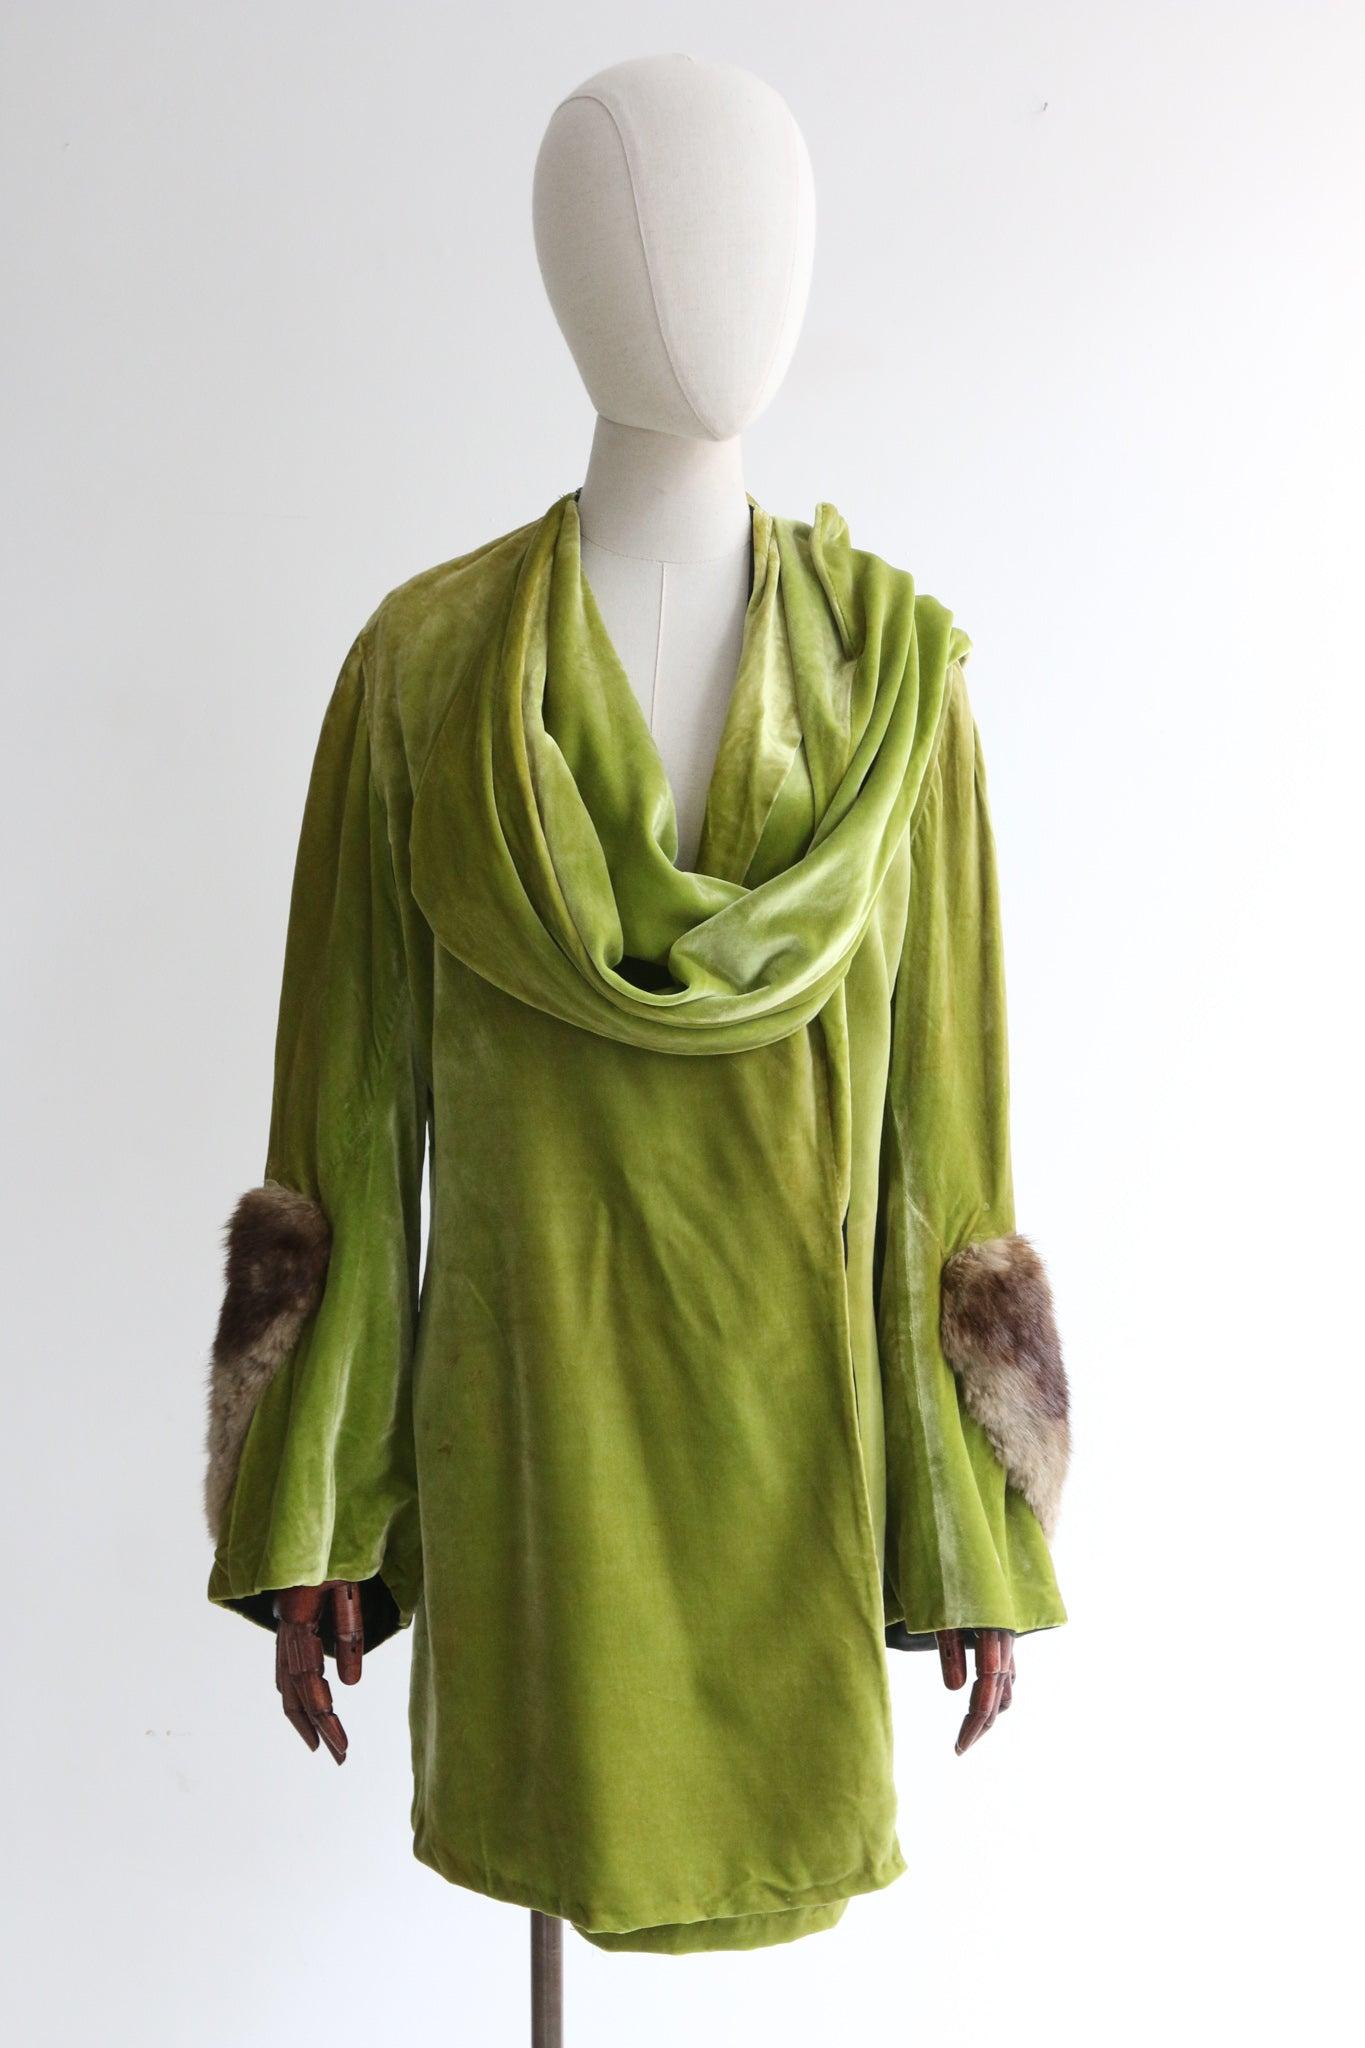 Made in the most delicious shade of apple green silk velvet, this original 1920's French coat, is a rare piece to behold.

Her elegant shoulder line is set off by a cross over front design from which a mock neck scarf hangs along the right hand